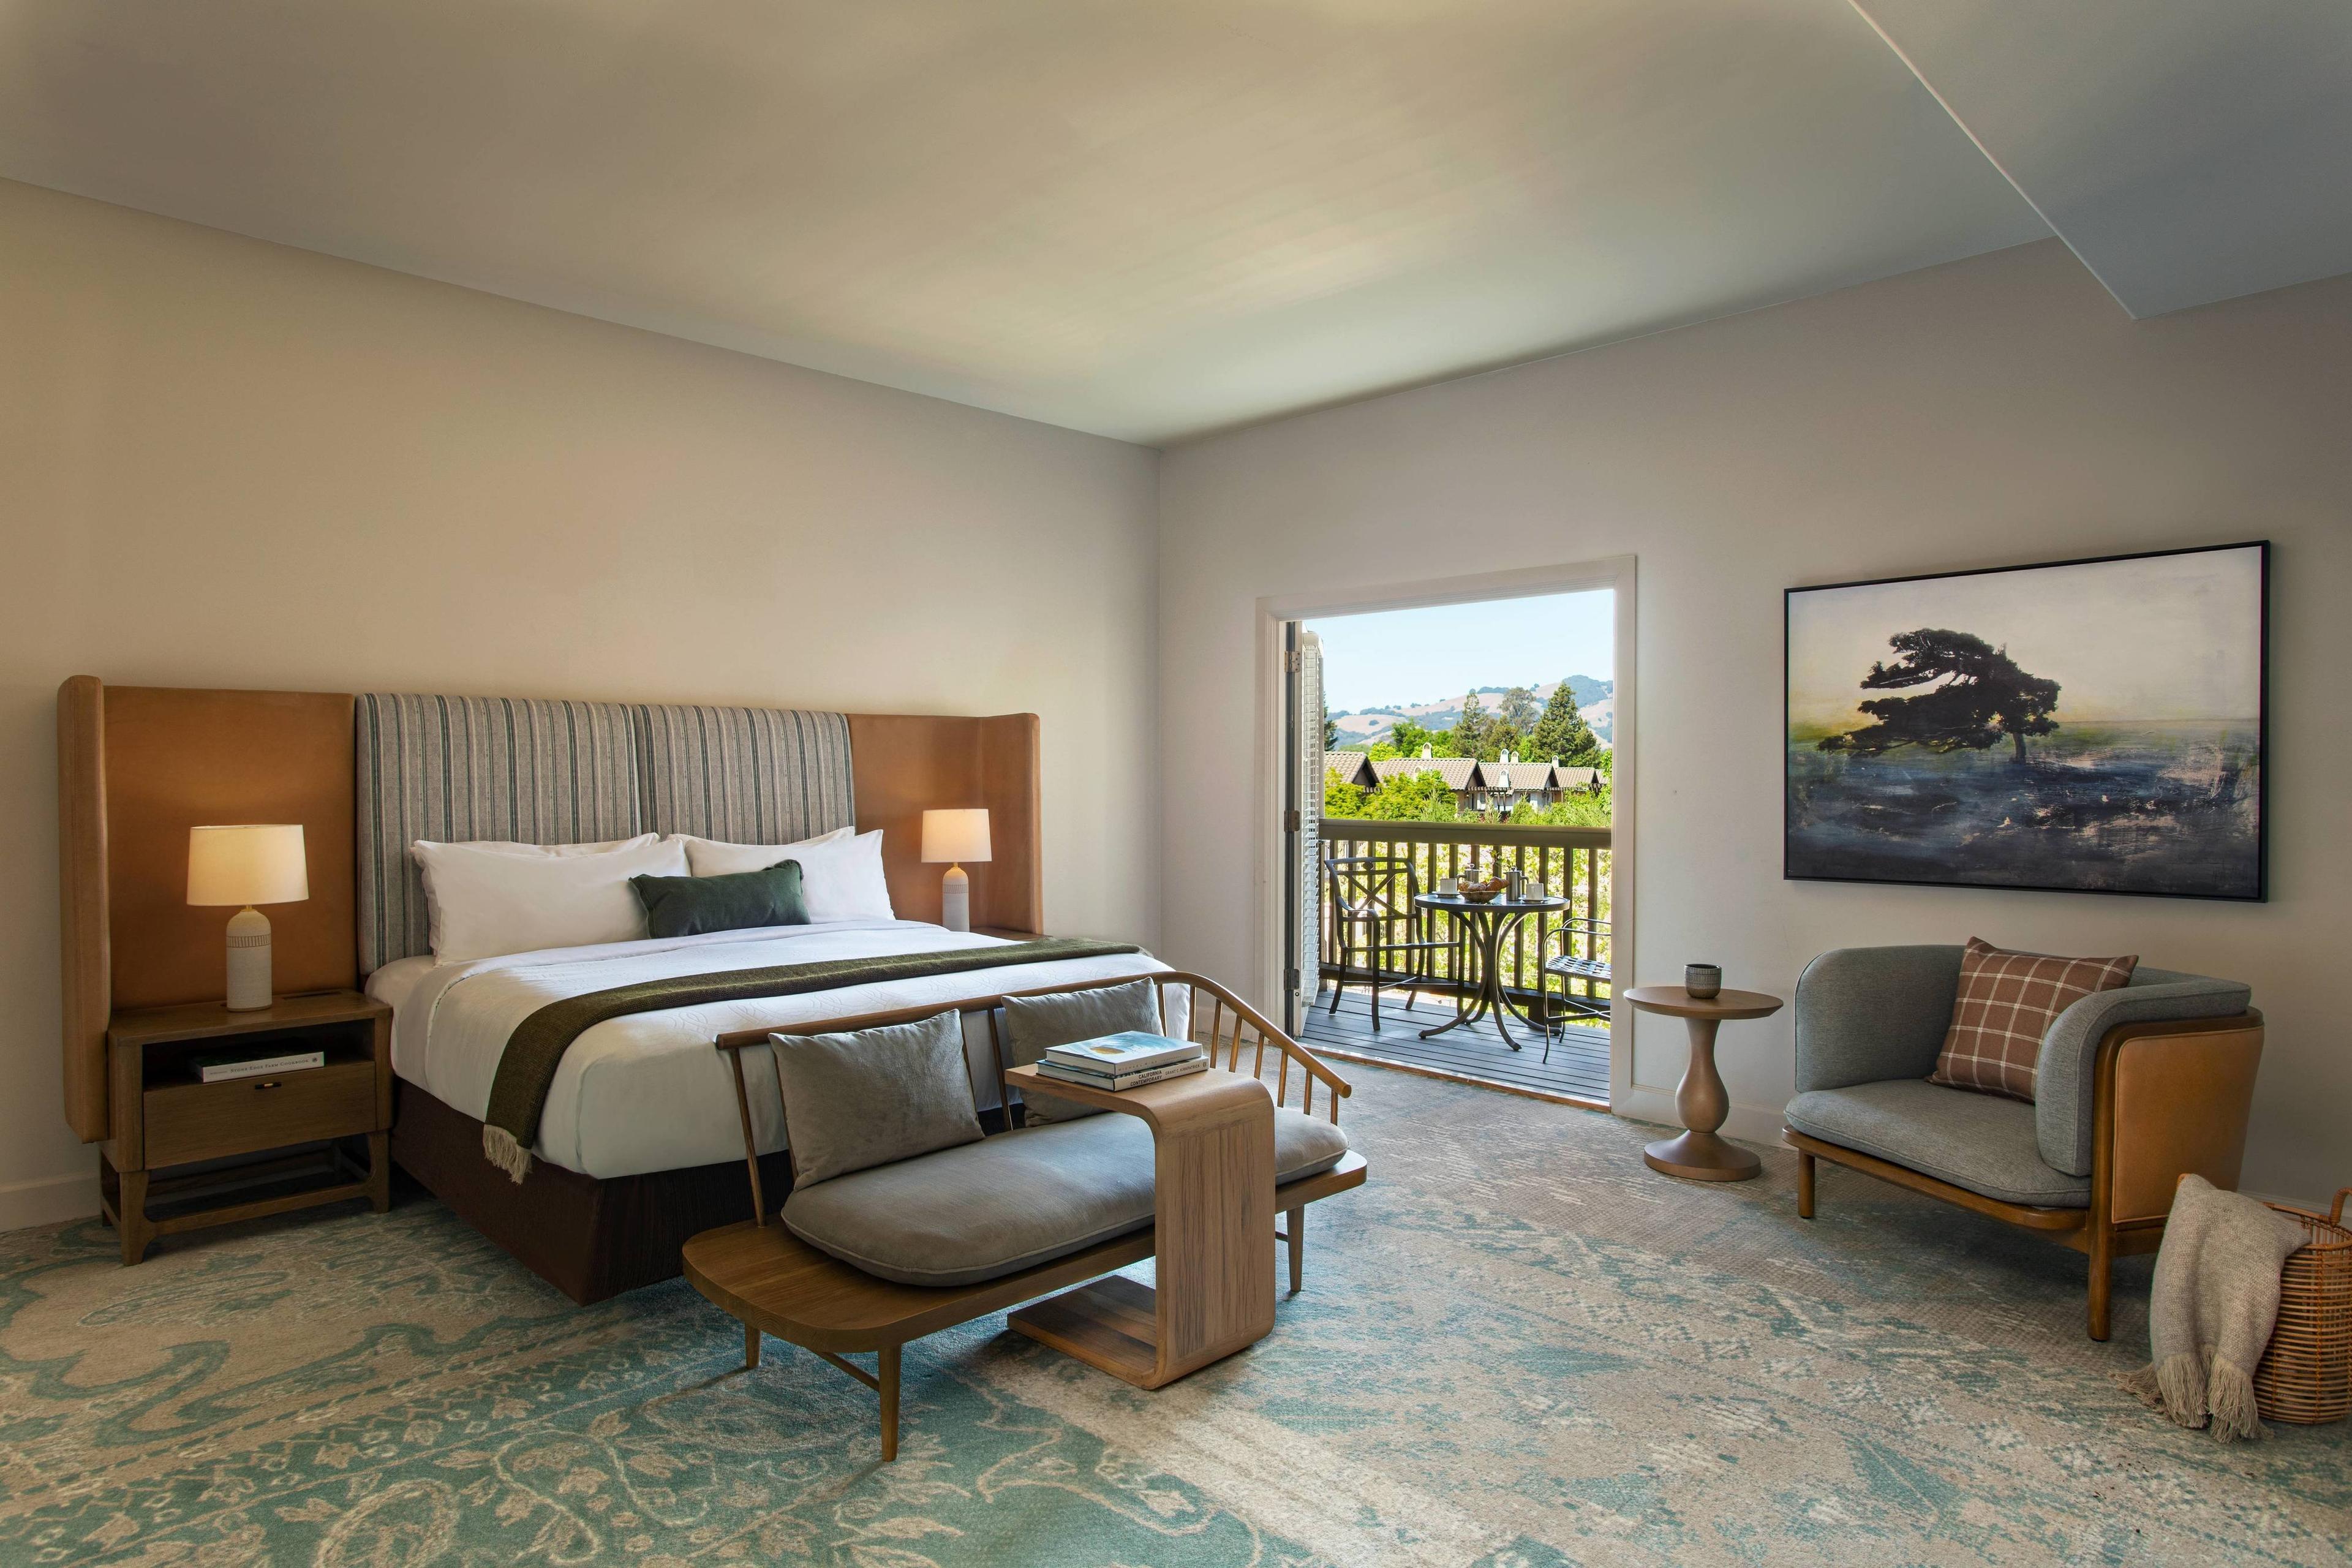 Located in the main building, our lodge premier suites feature an elegant, expansive bedroom and a stylish living room with a fireplace, wet bar, and sofa bed.